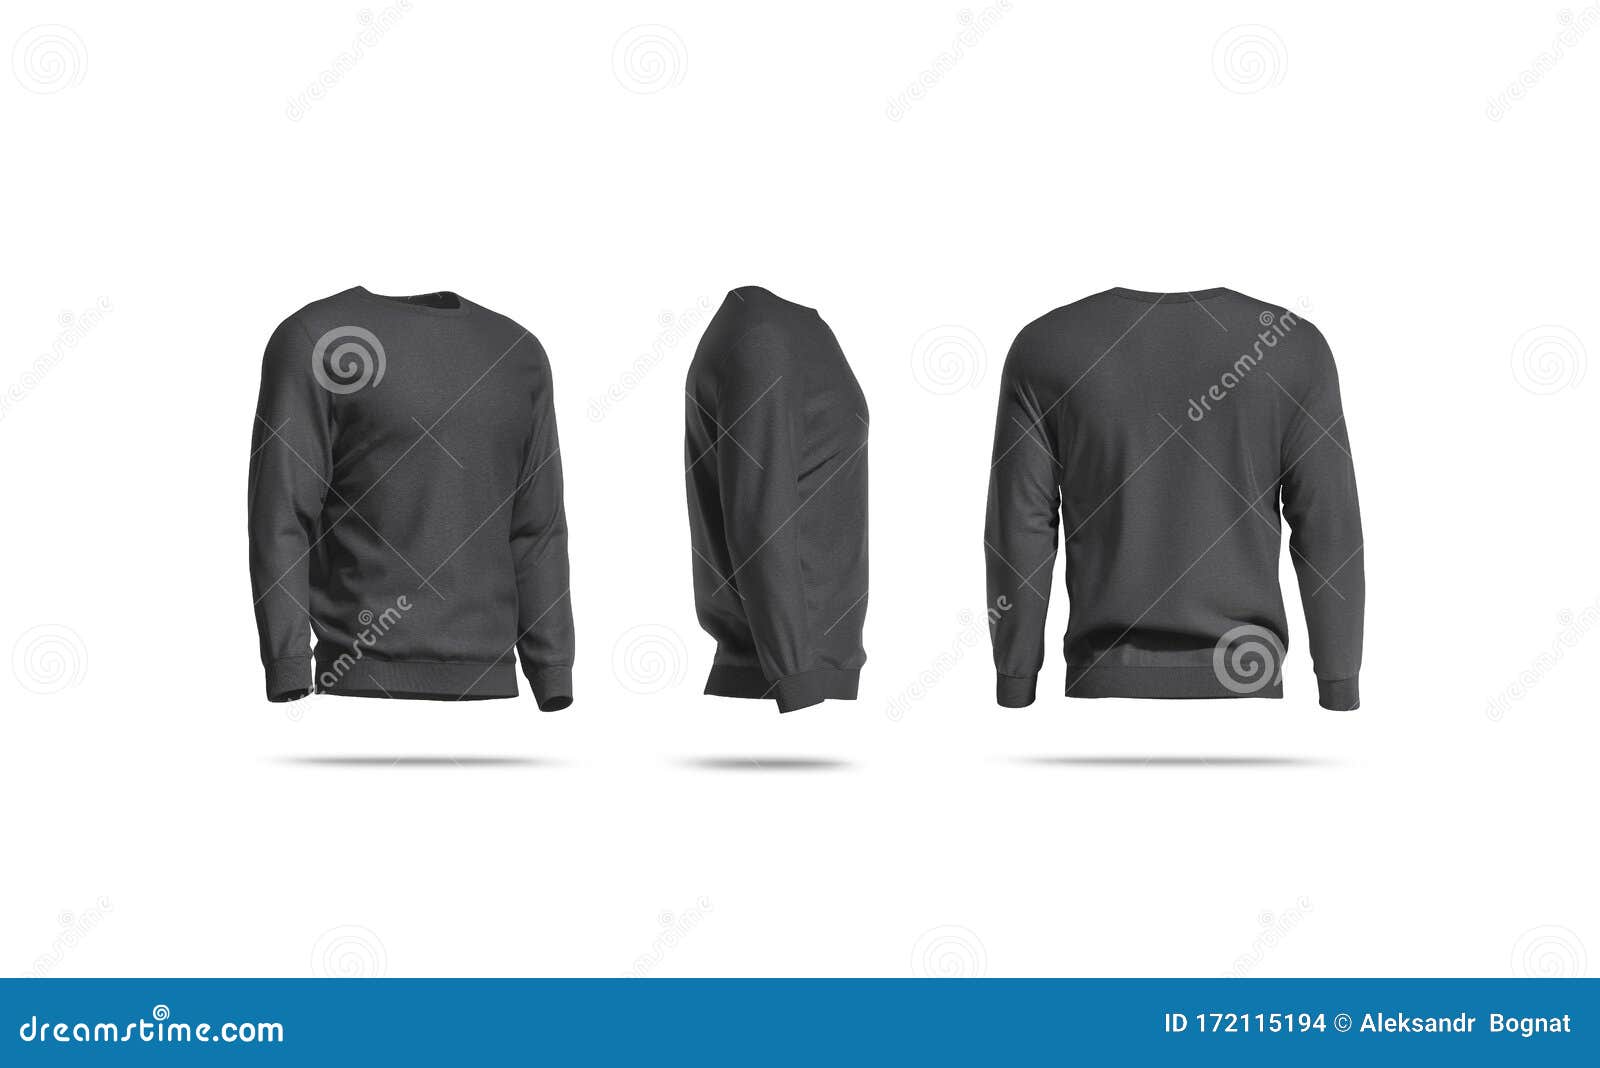 Download Blank Black Casual Sweatshirt Mockup, Side And Back View ...